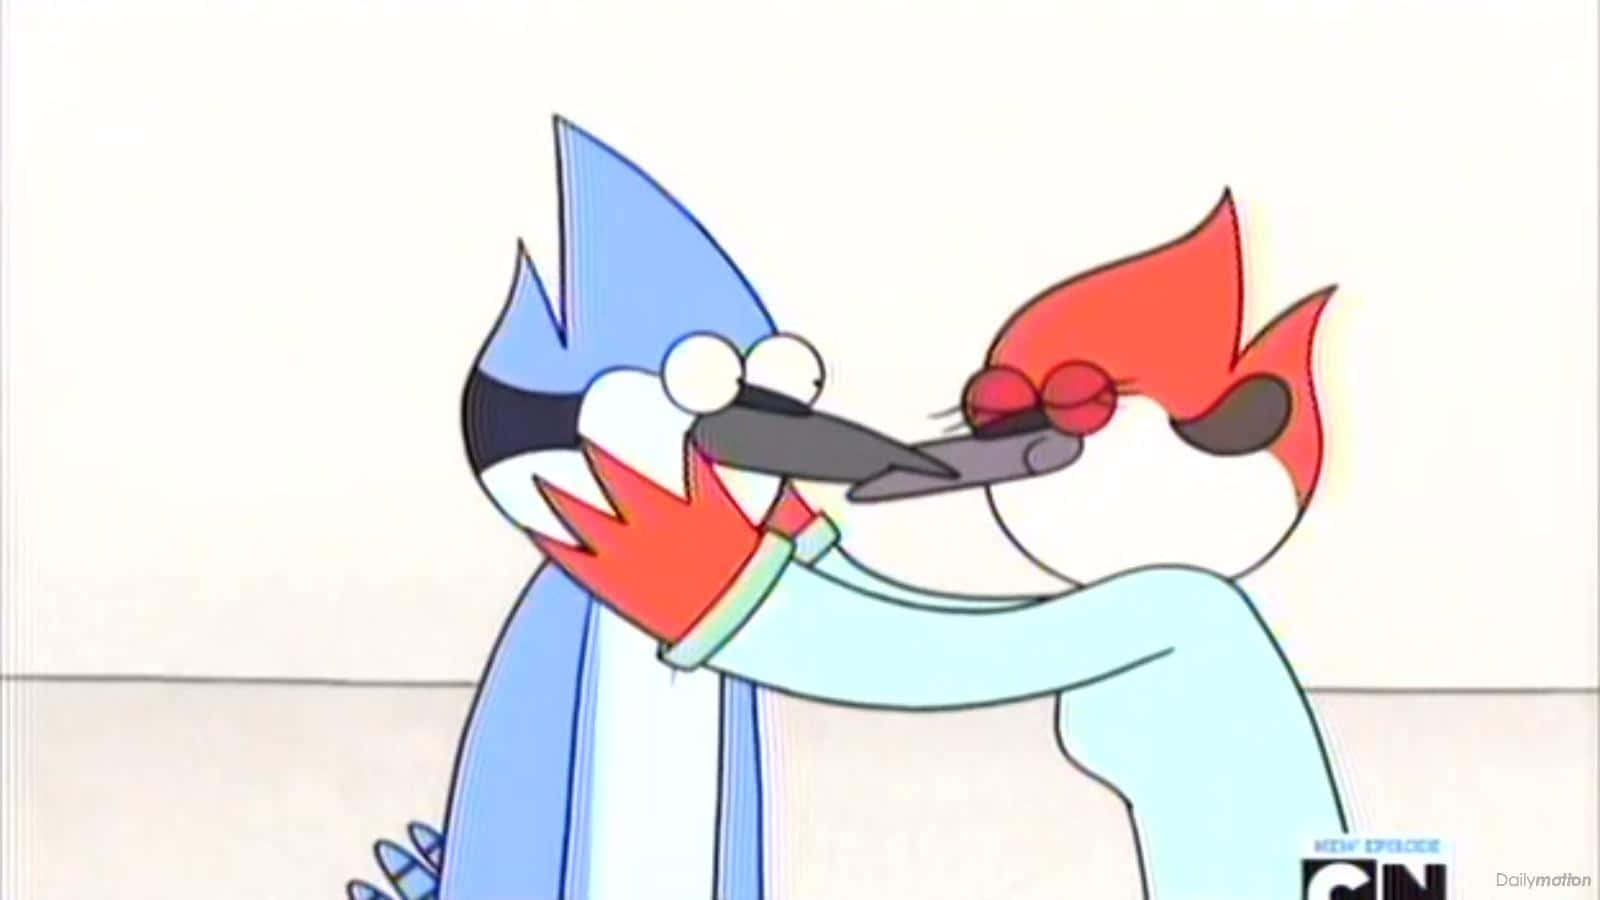 Mordecai and Rigby on a surreal adventure in the Regular Show